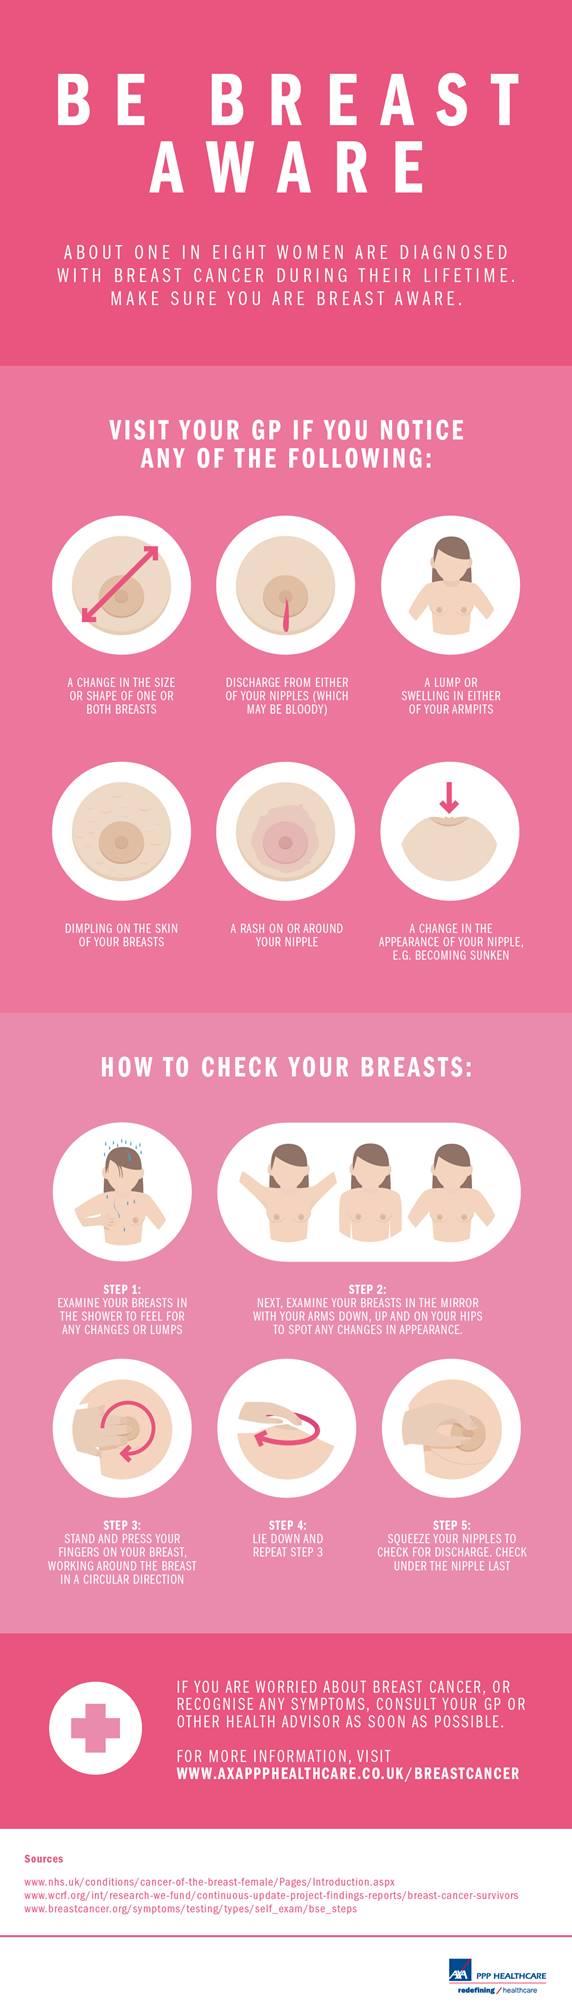 How to check your breasts infographic